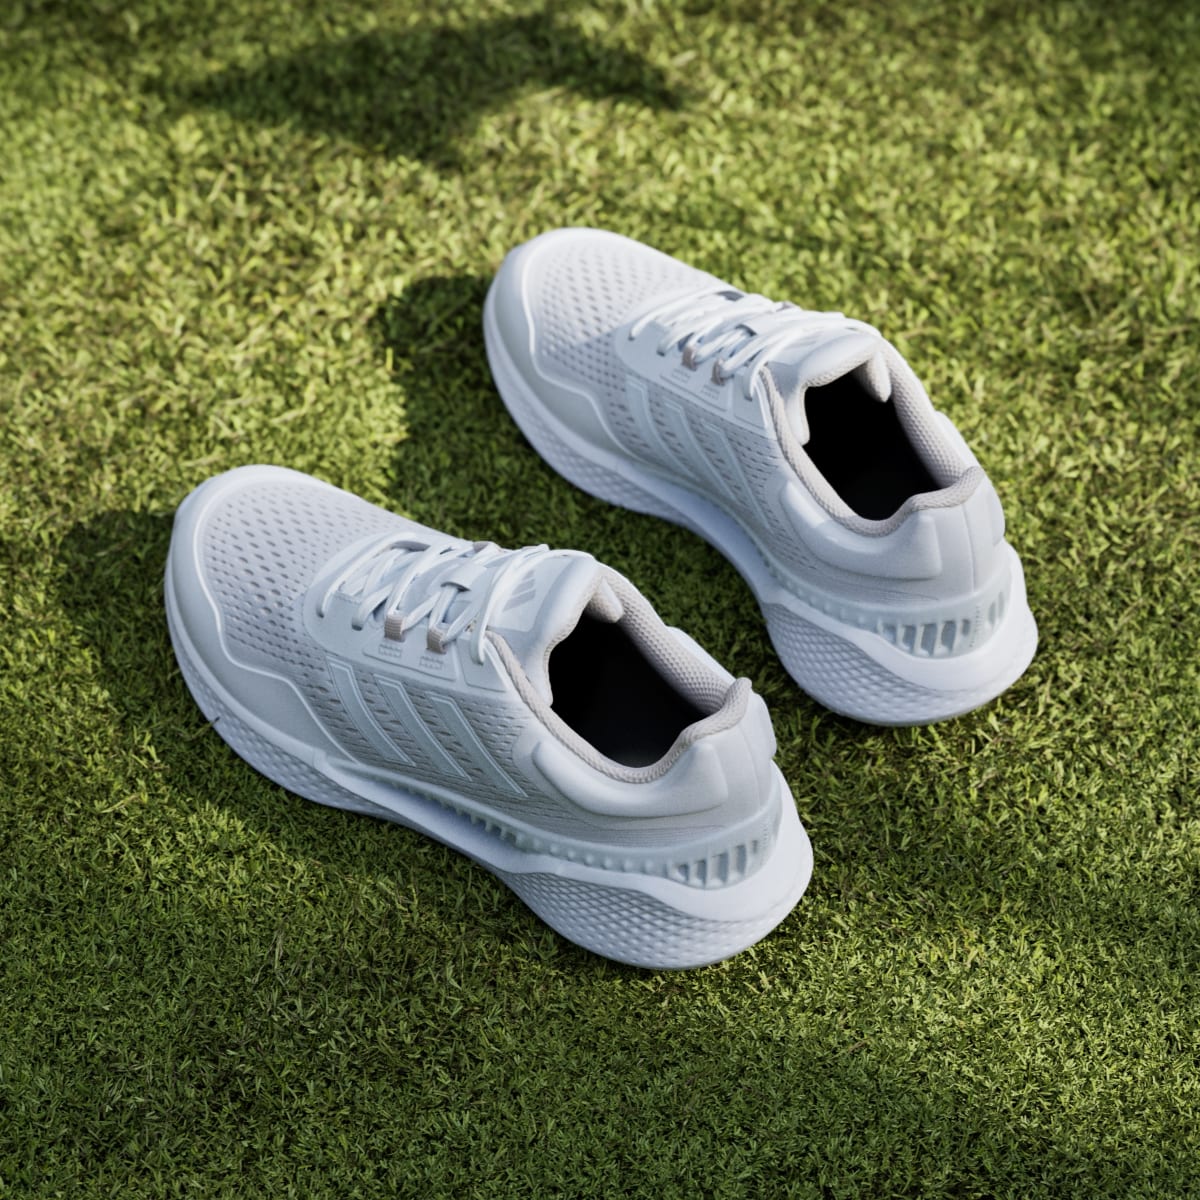 Adidas Summervent 24 Bounce Golf Shoes Low. 7